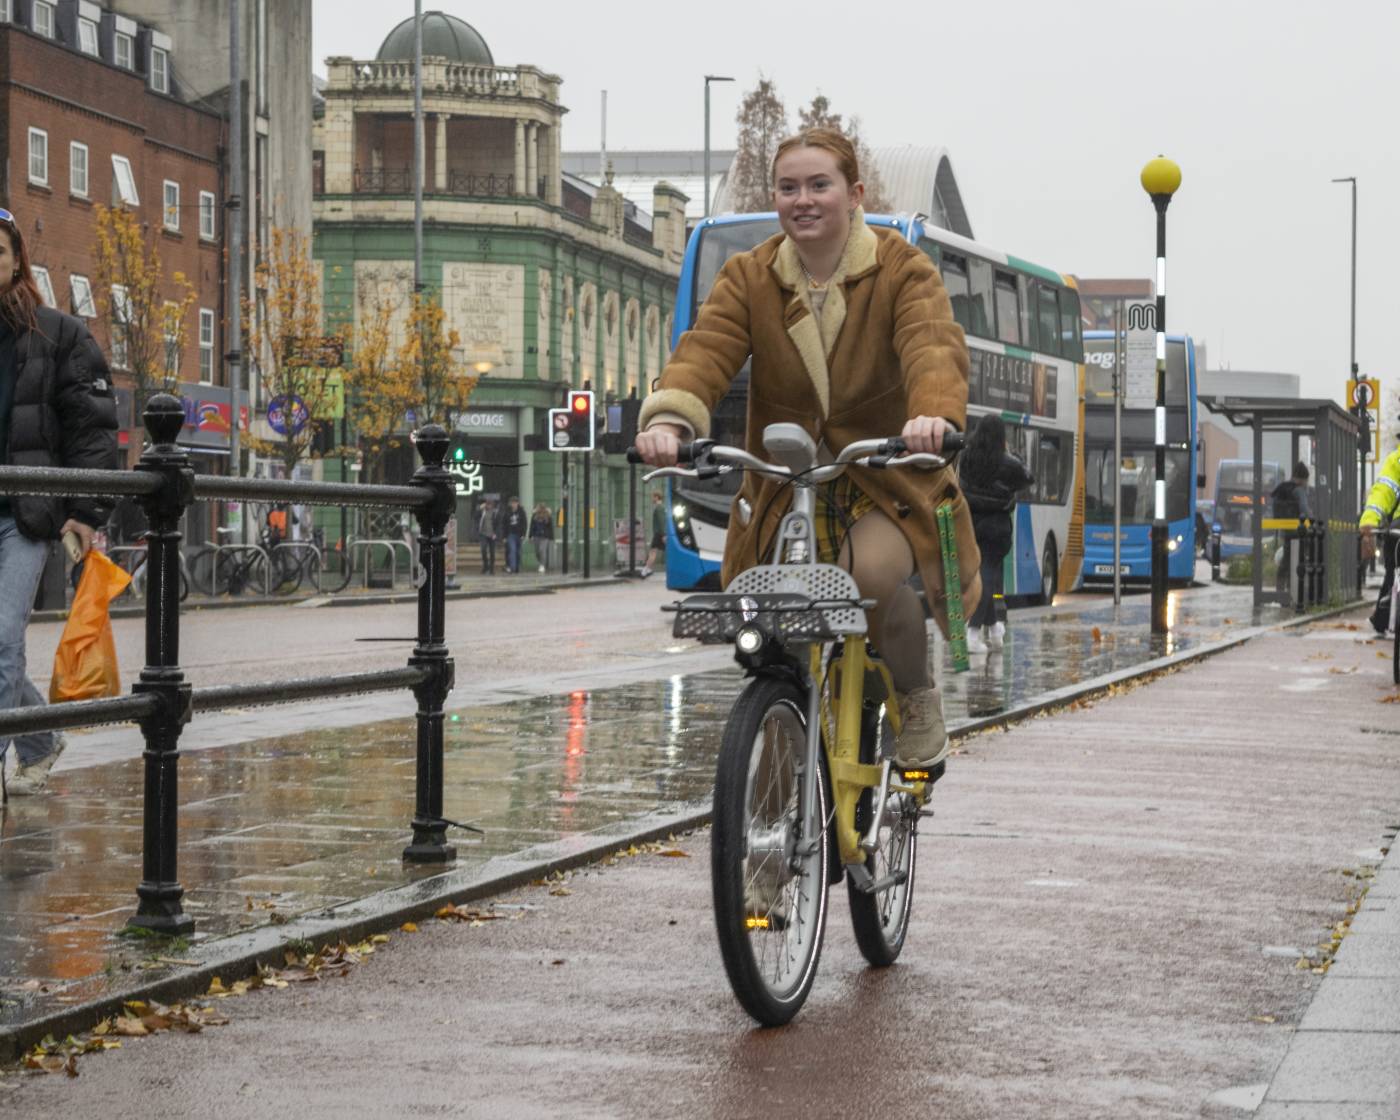 A student riding a cycle hire bike on Oxford Road in Manchester